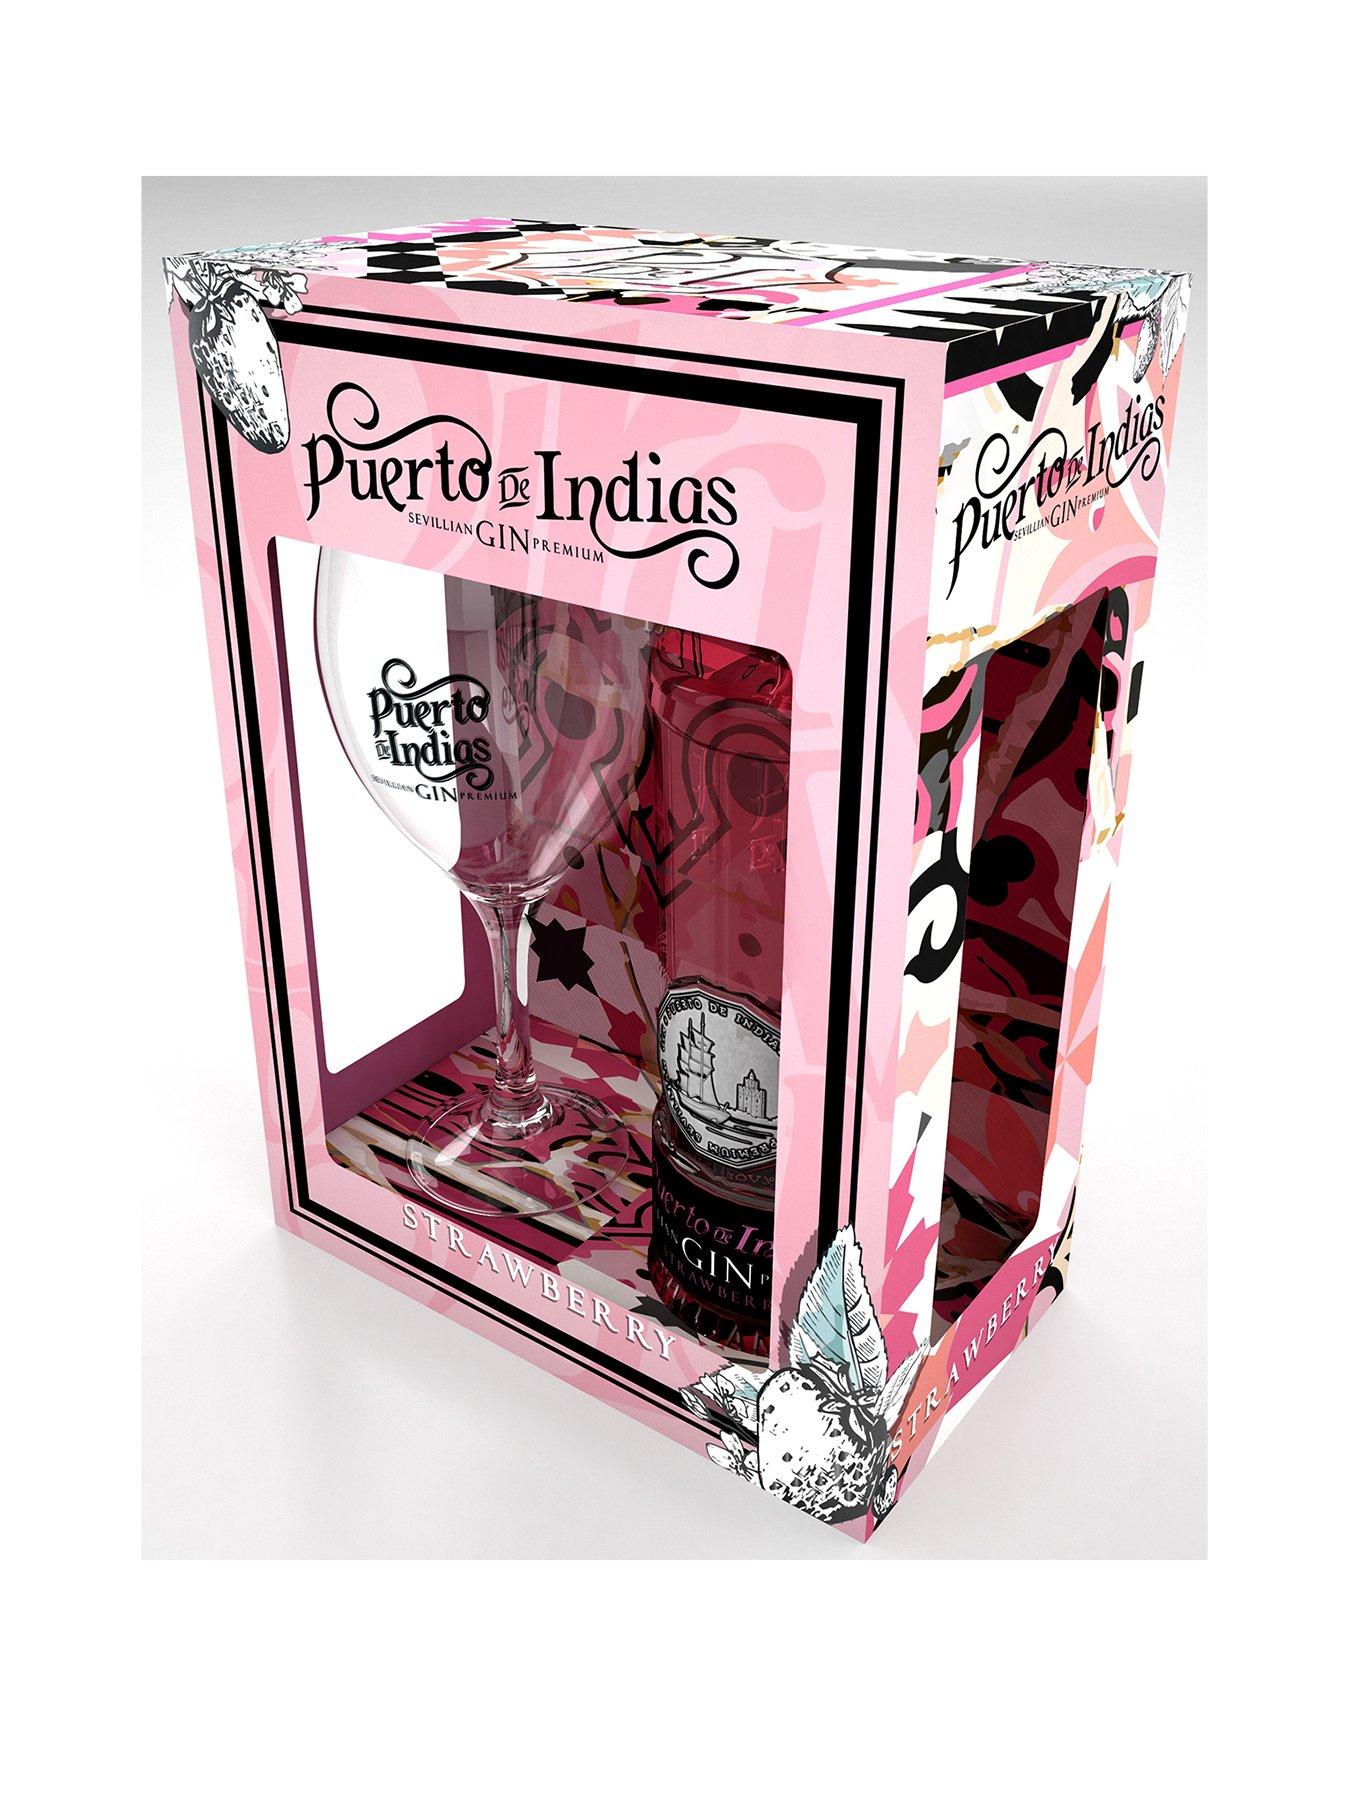 GIFT PACK GIN PUERTO DE INDIAS STRAWBERRY x 0,70L + COPA LONDON